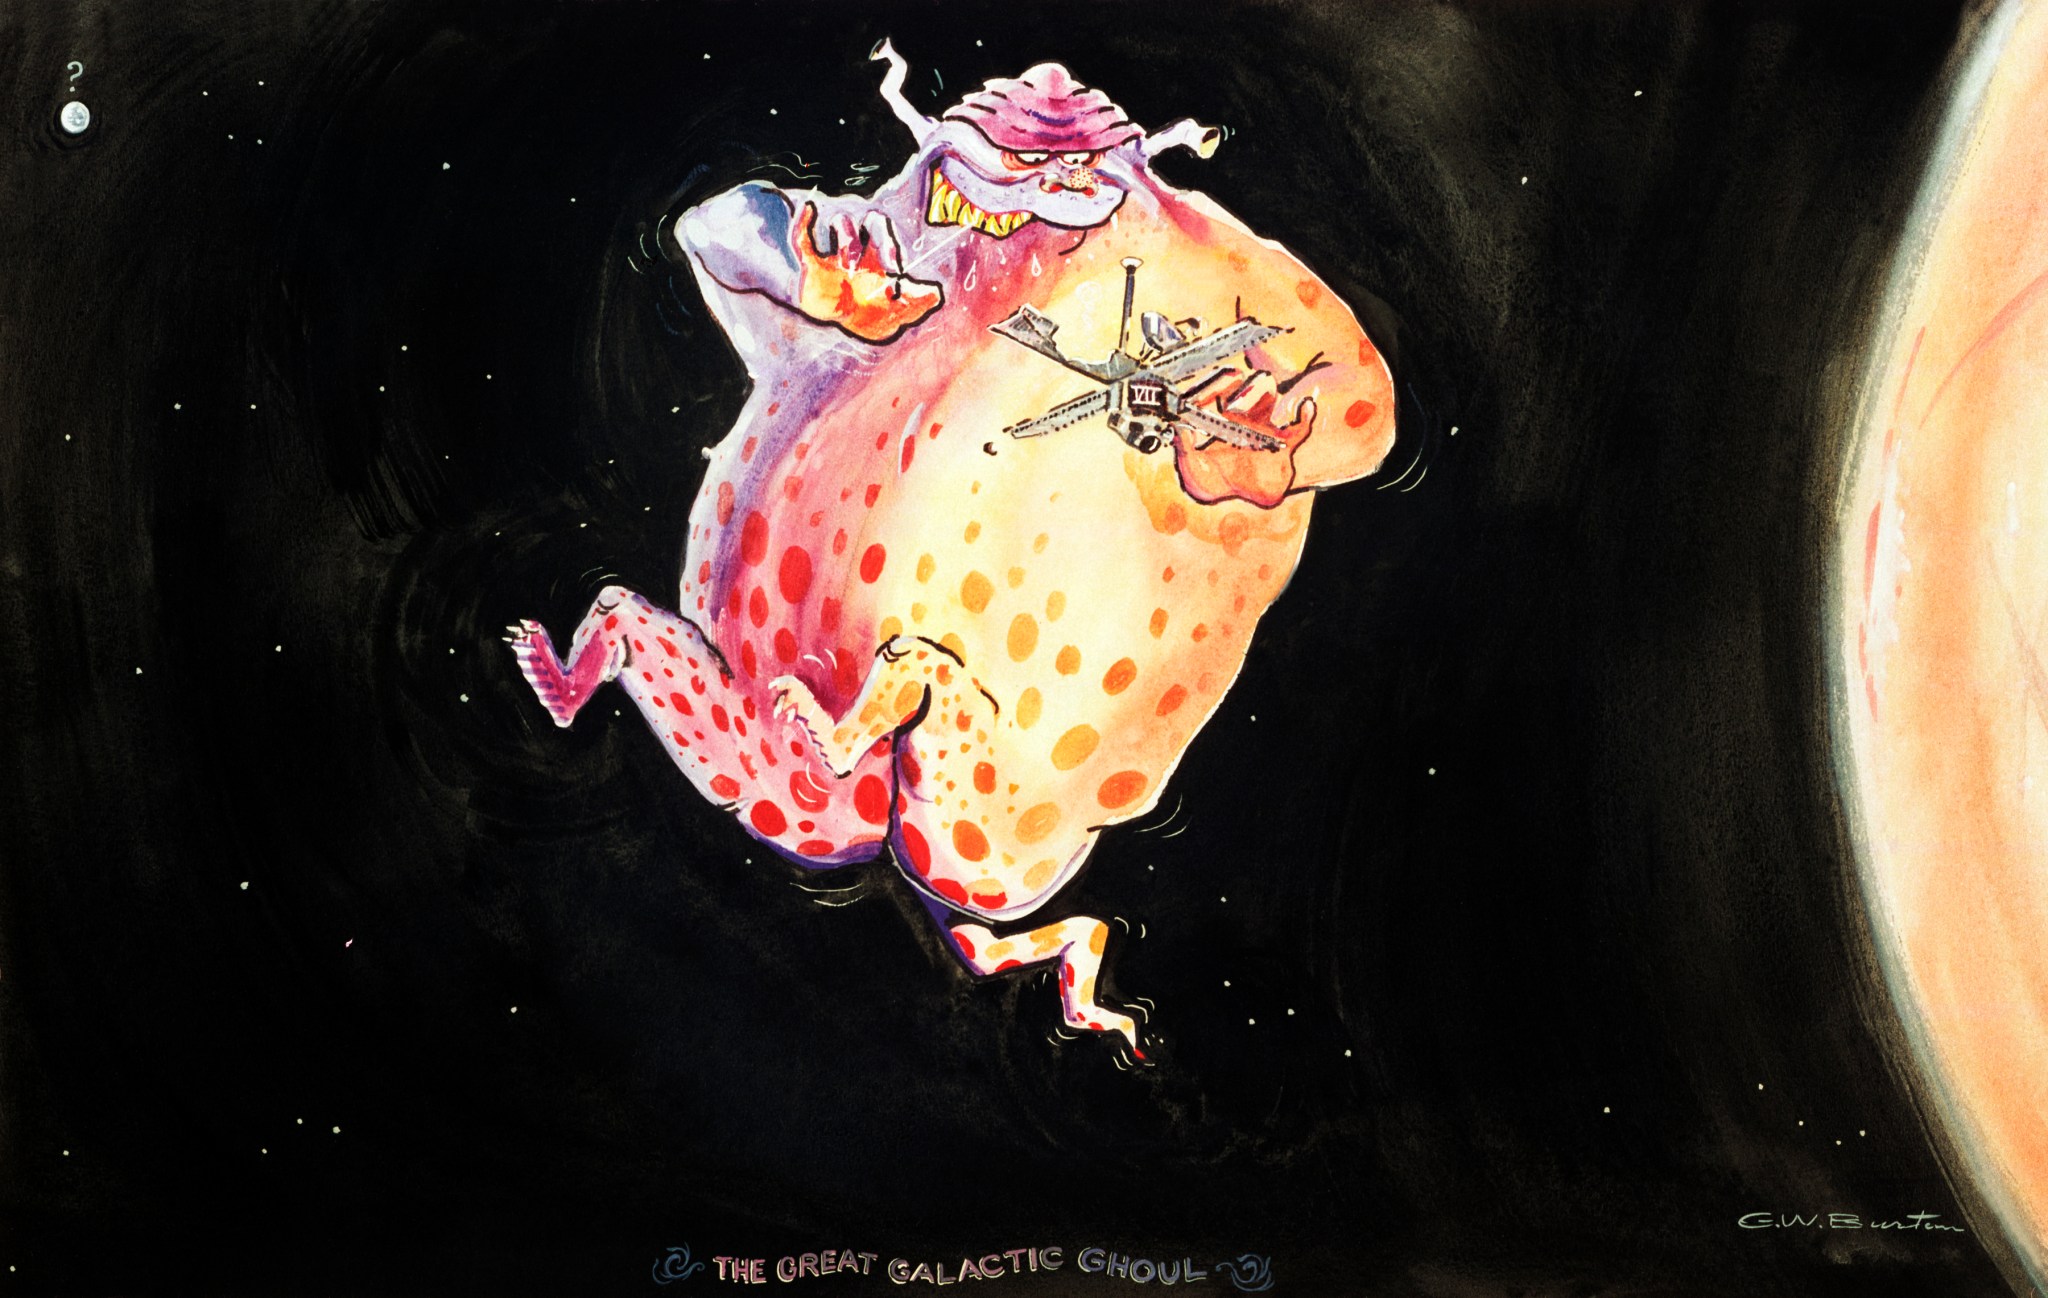 Drawing of a colorful ghoul floating in space eating the Mariner seven spacecraft near Mars. 